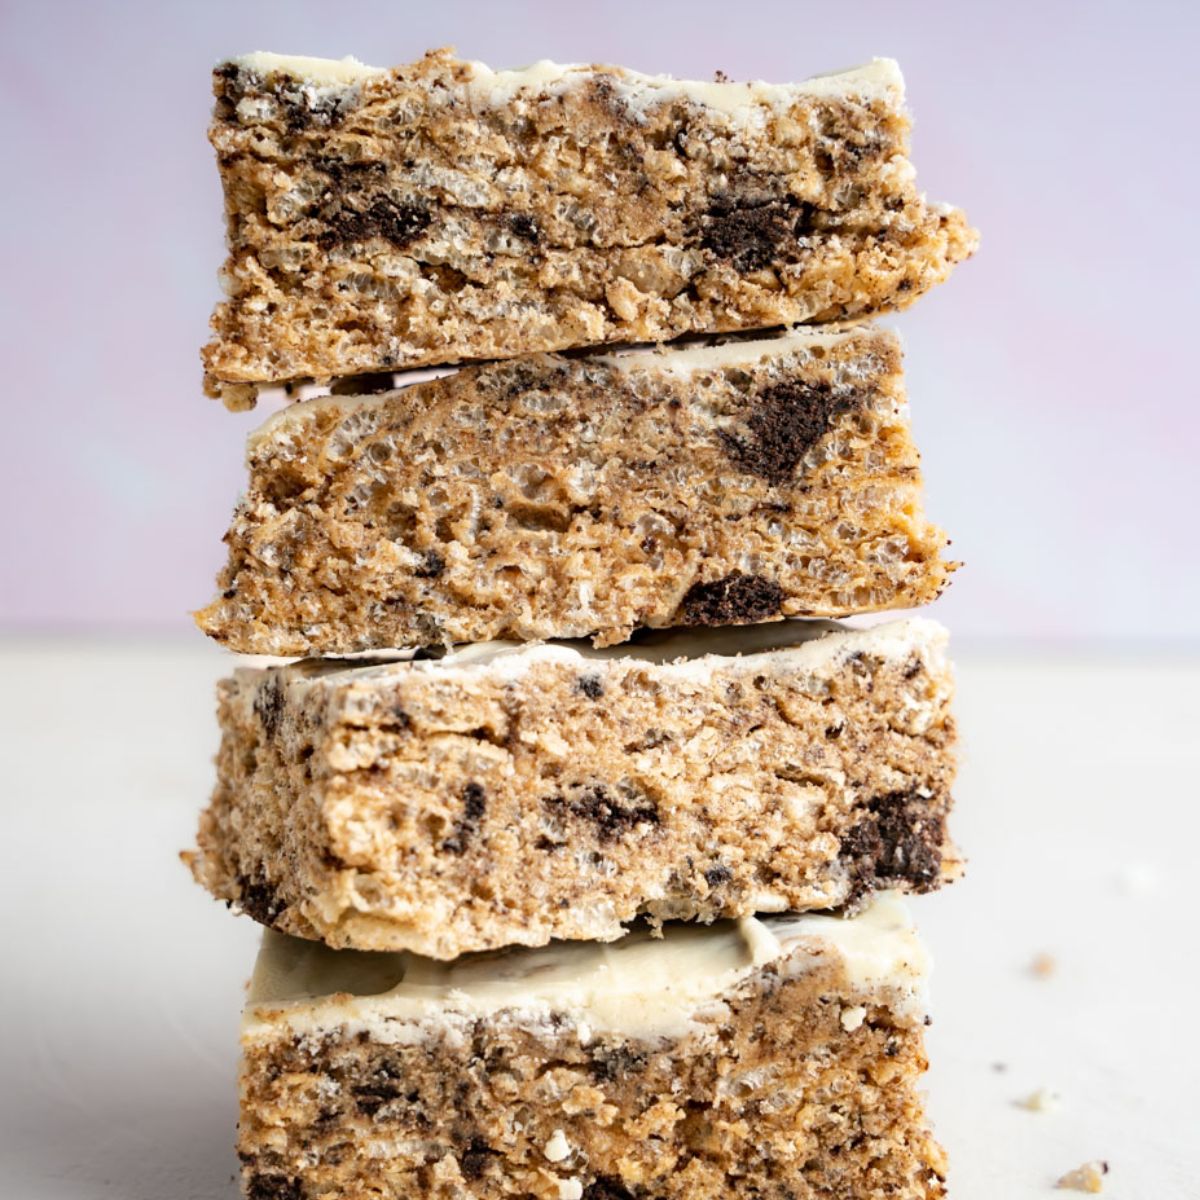 Four Stacked Cookies and Cream protein bars with white chocolate coating on the top